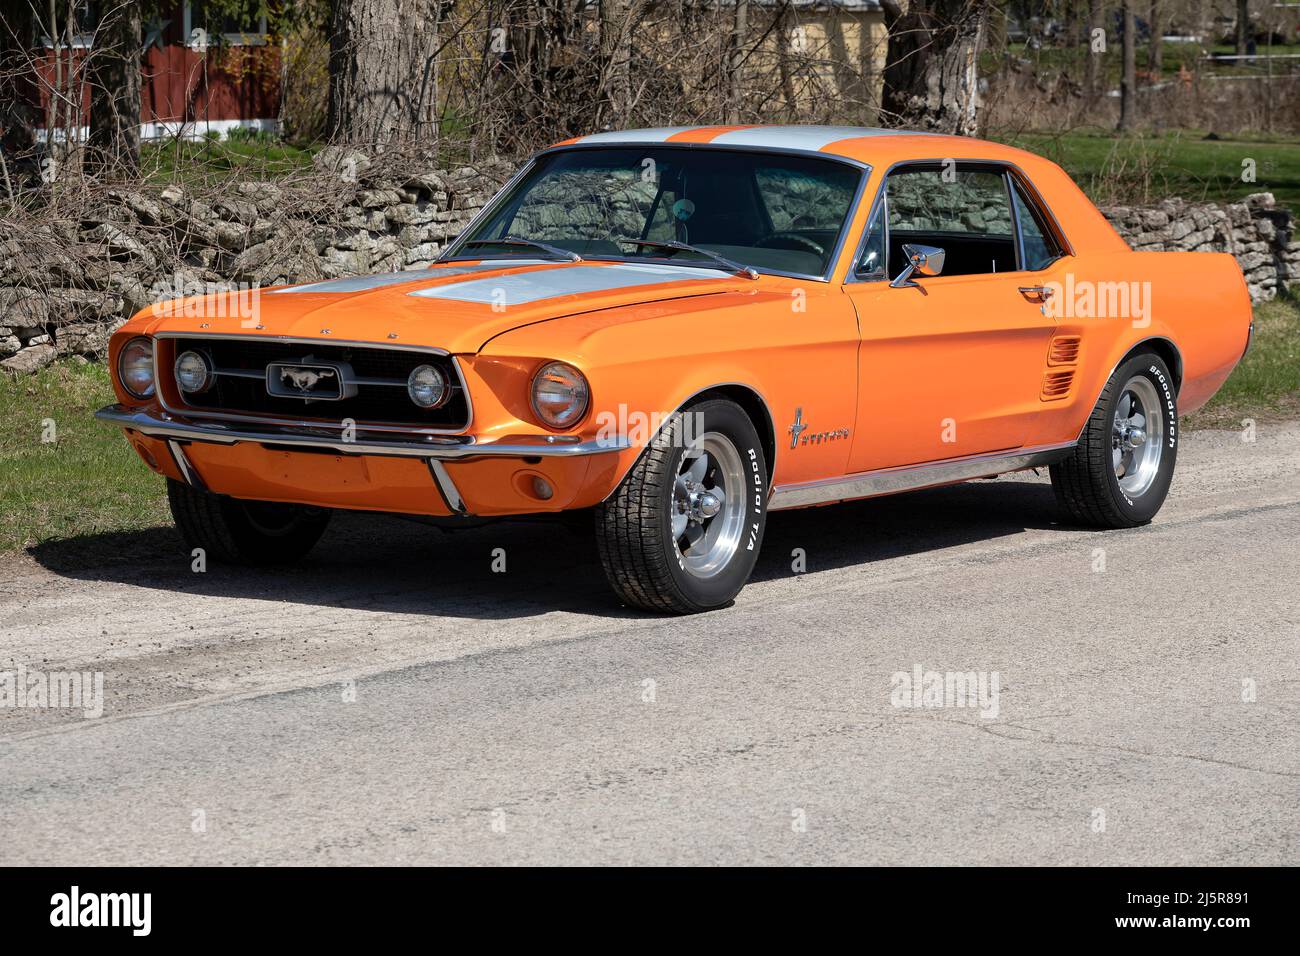 1967 Ford Mustang on pavement. Stock Photo